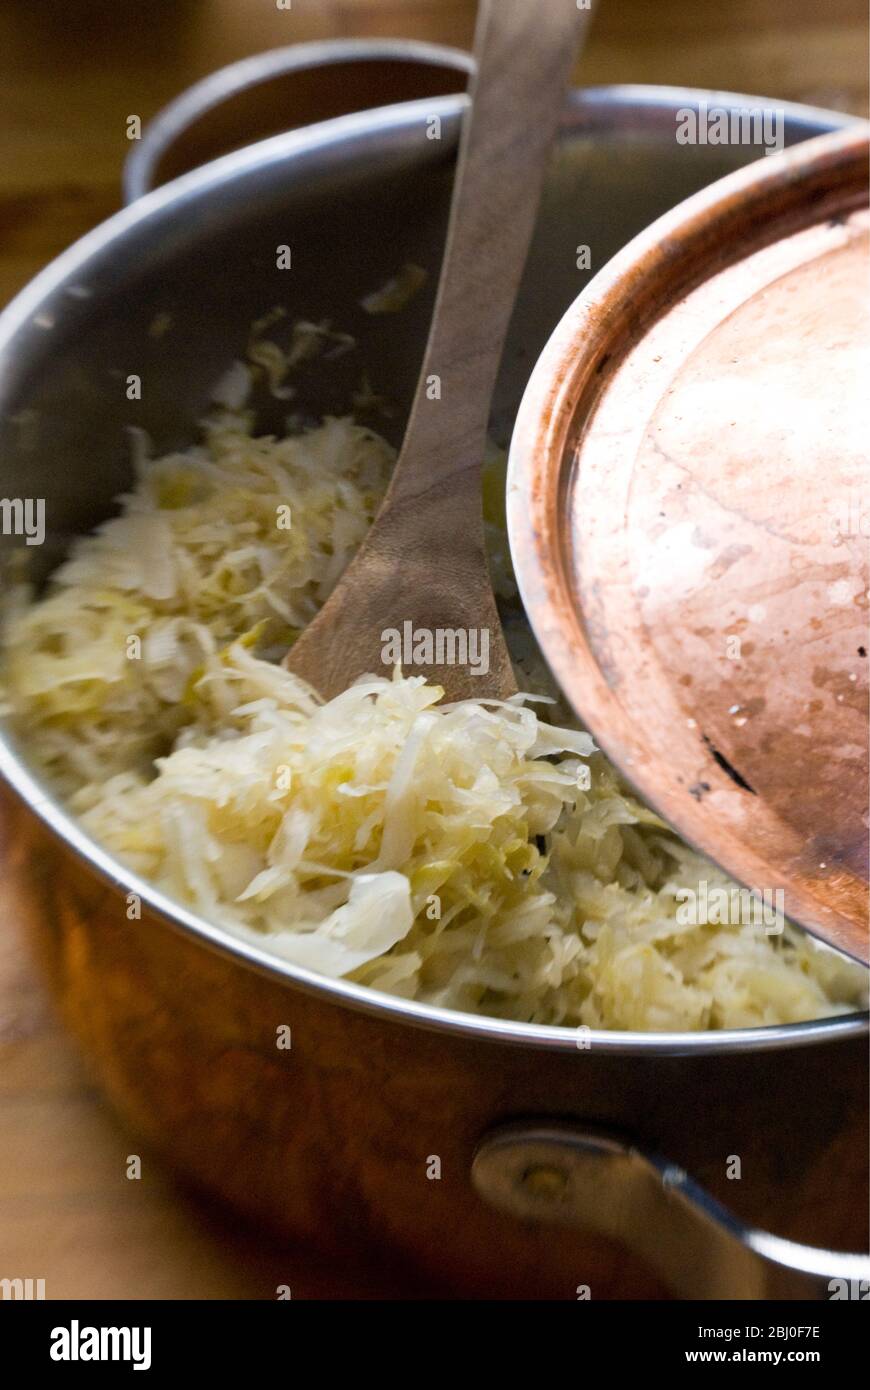 Copper pan with sauerkraut and wooden spoon - Stock Photo